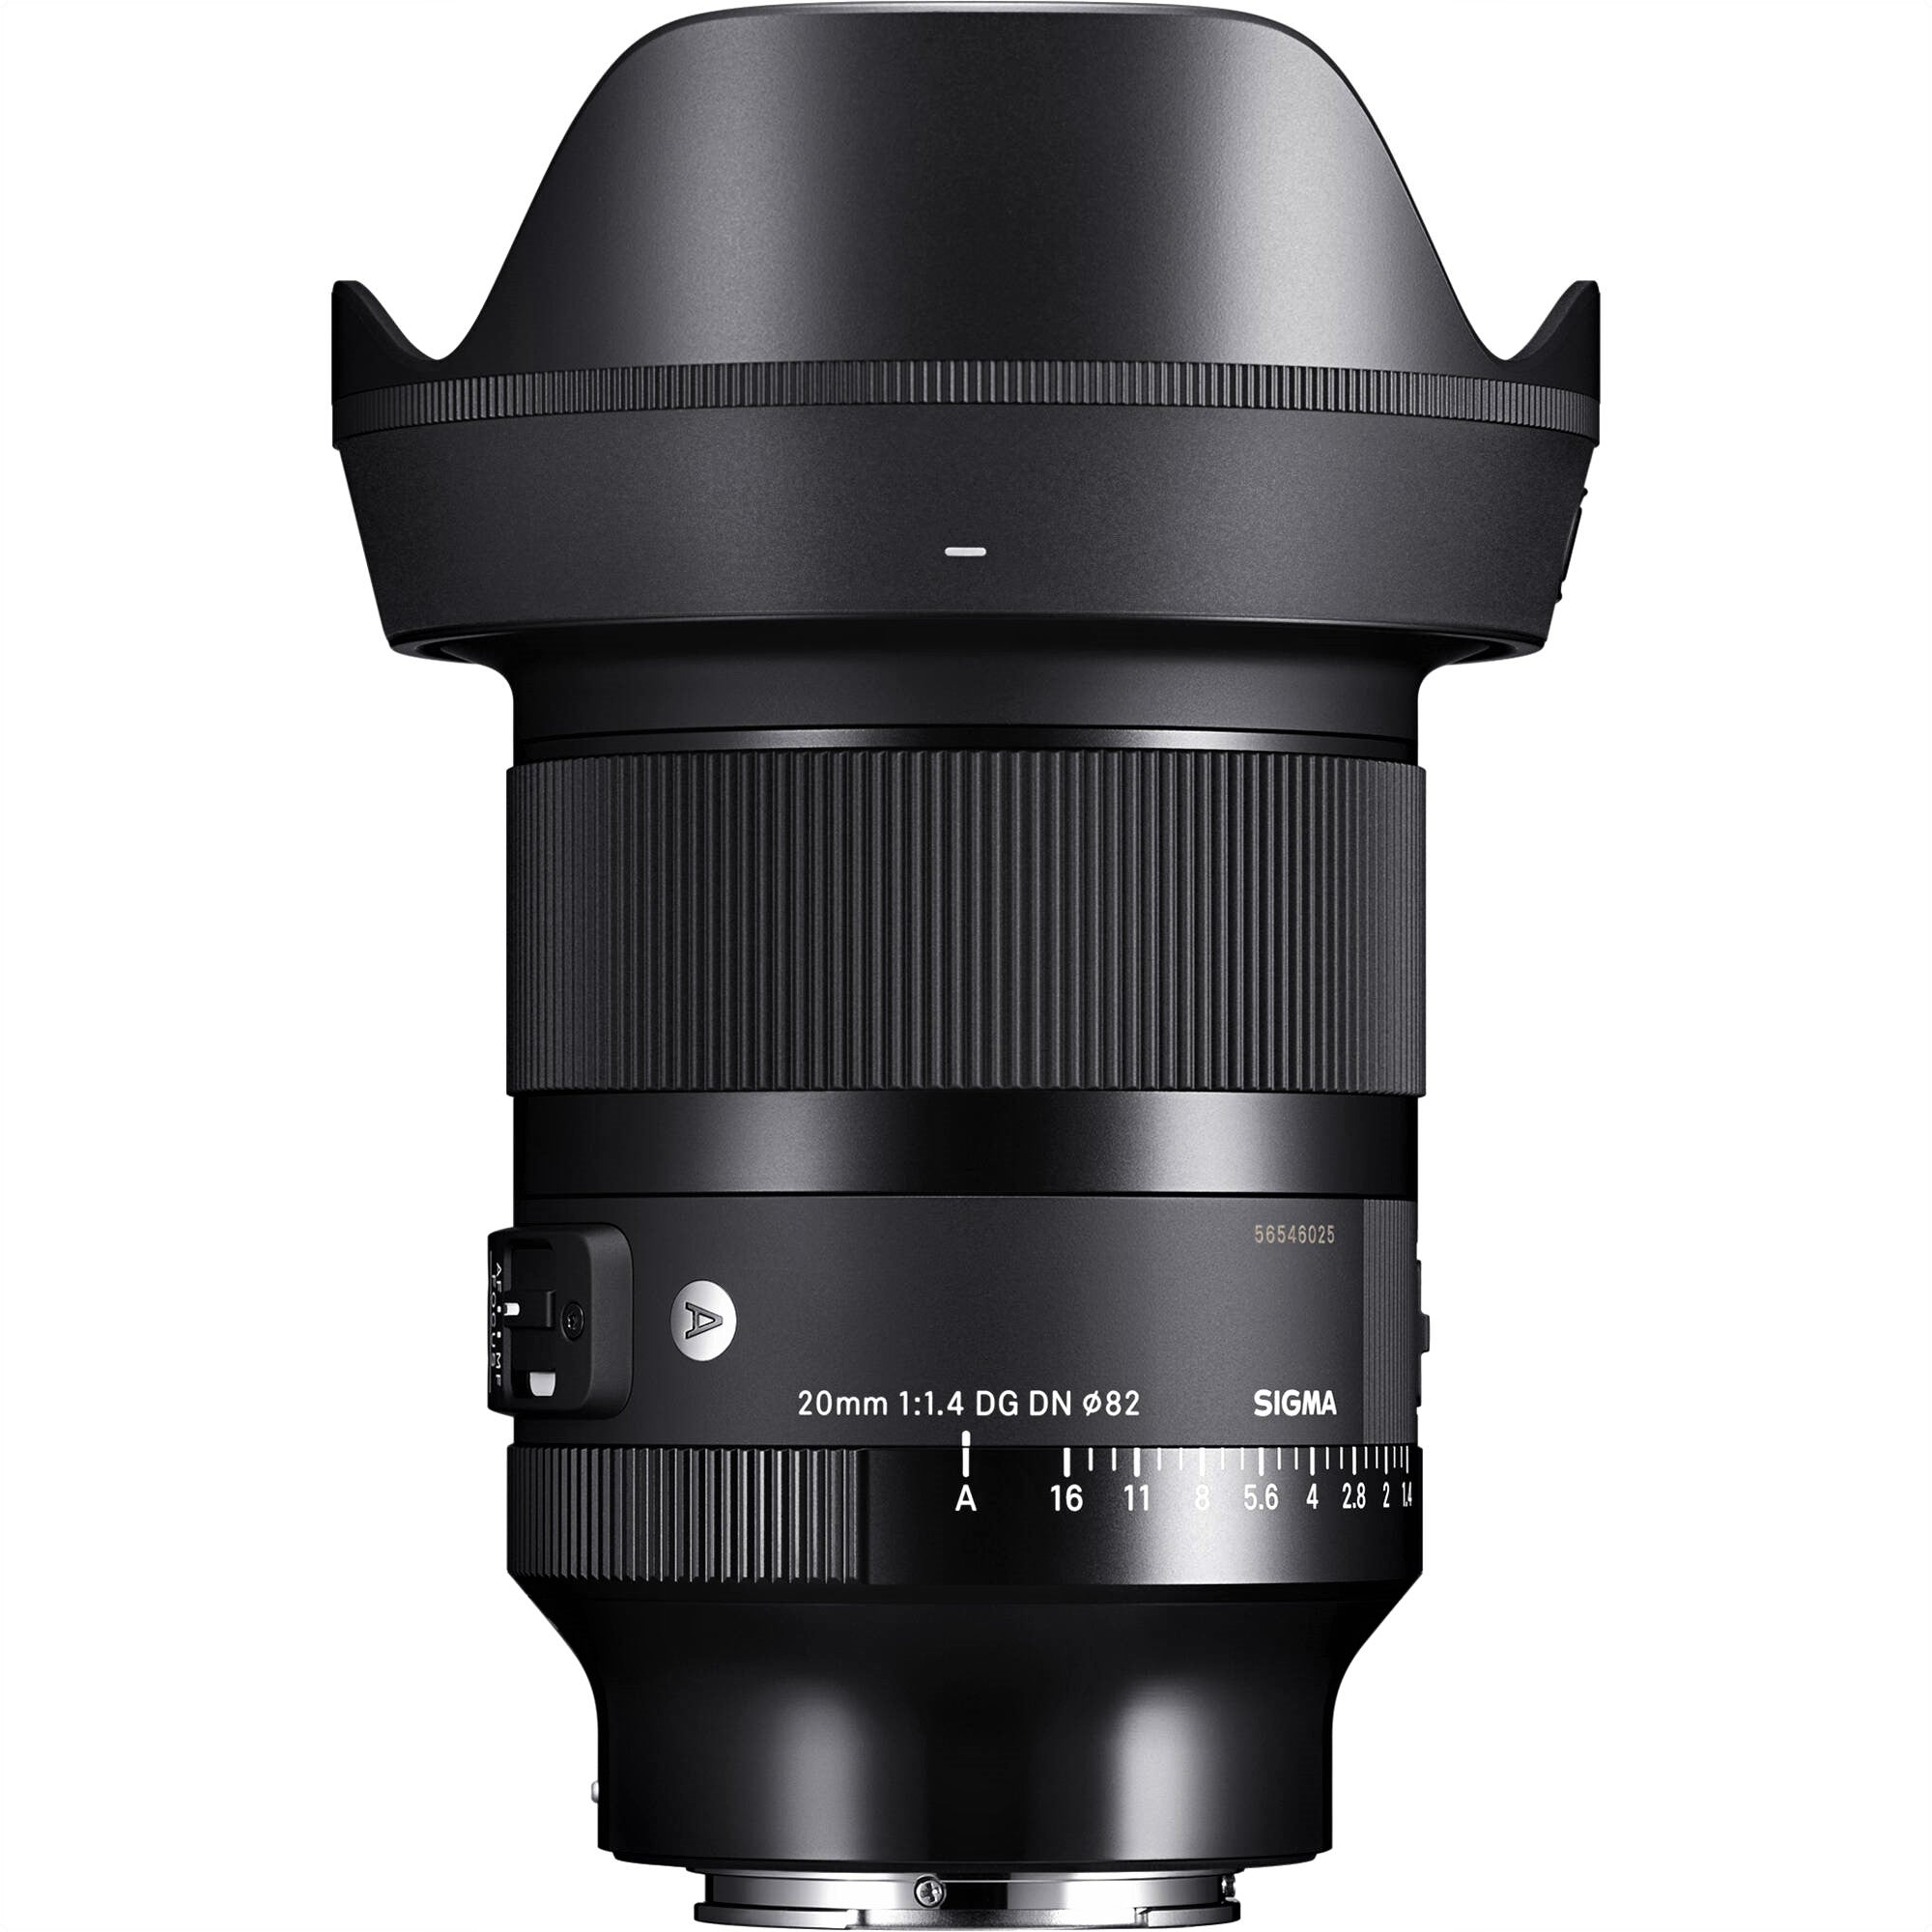 Sigma Lens Hood Attached to Sigma 20mm F1.4 DG DN Art Lens